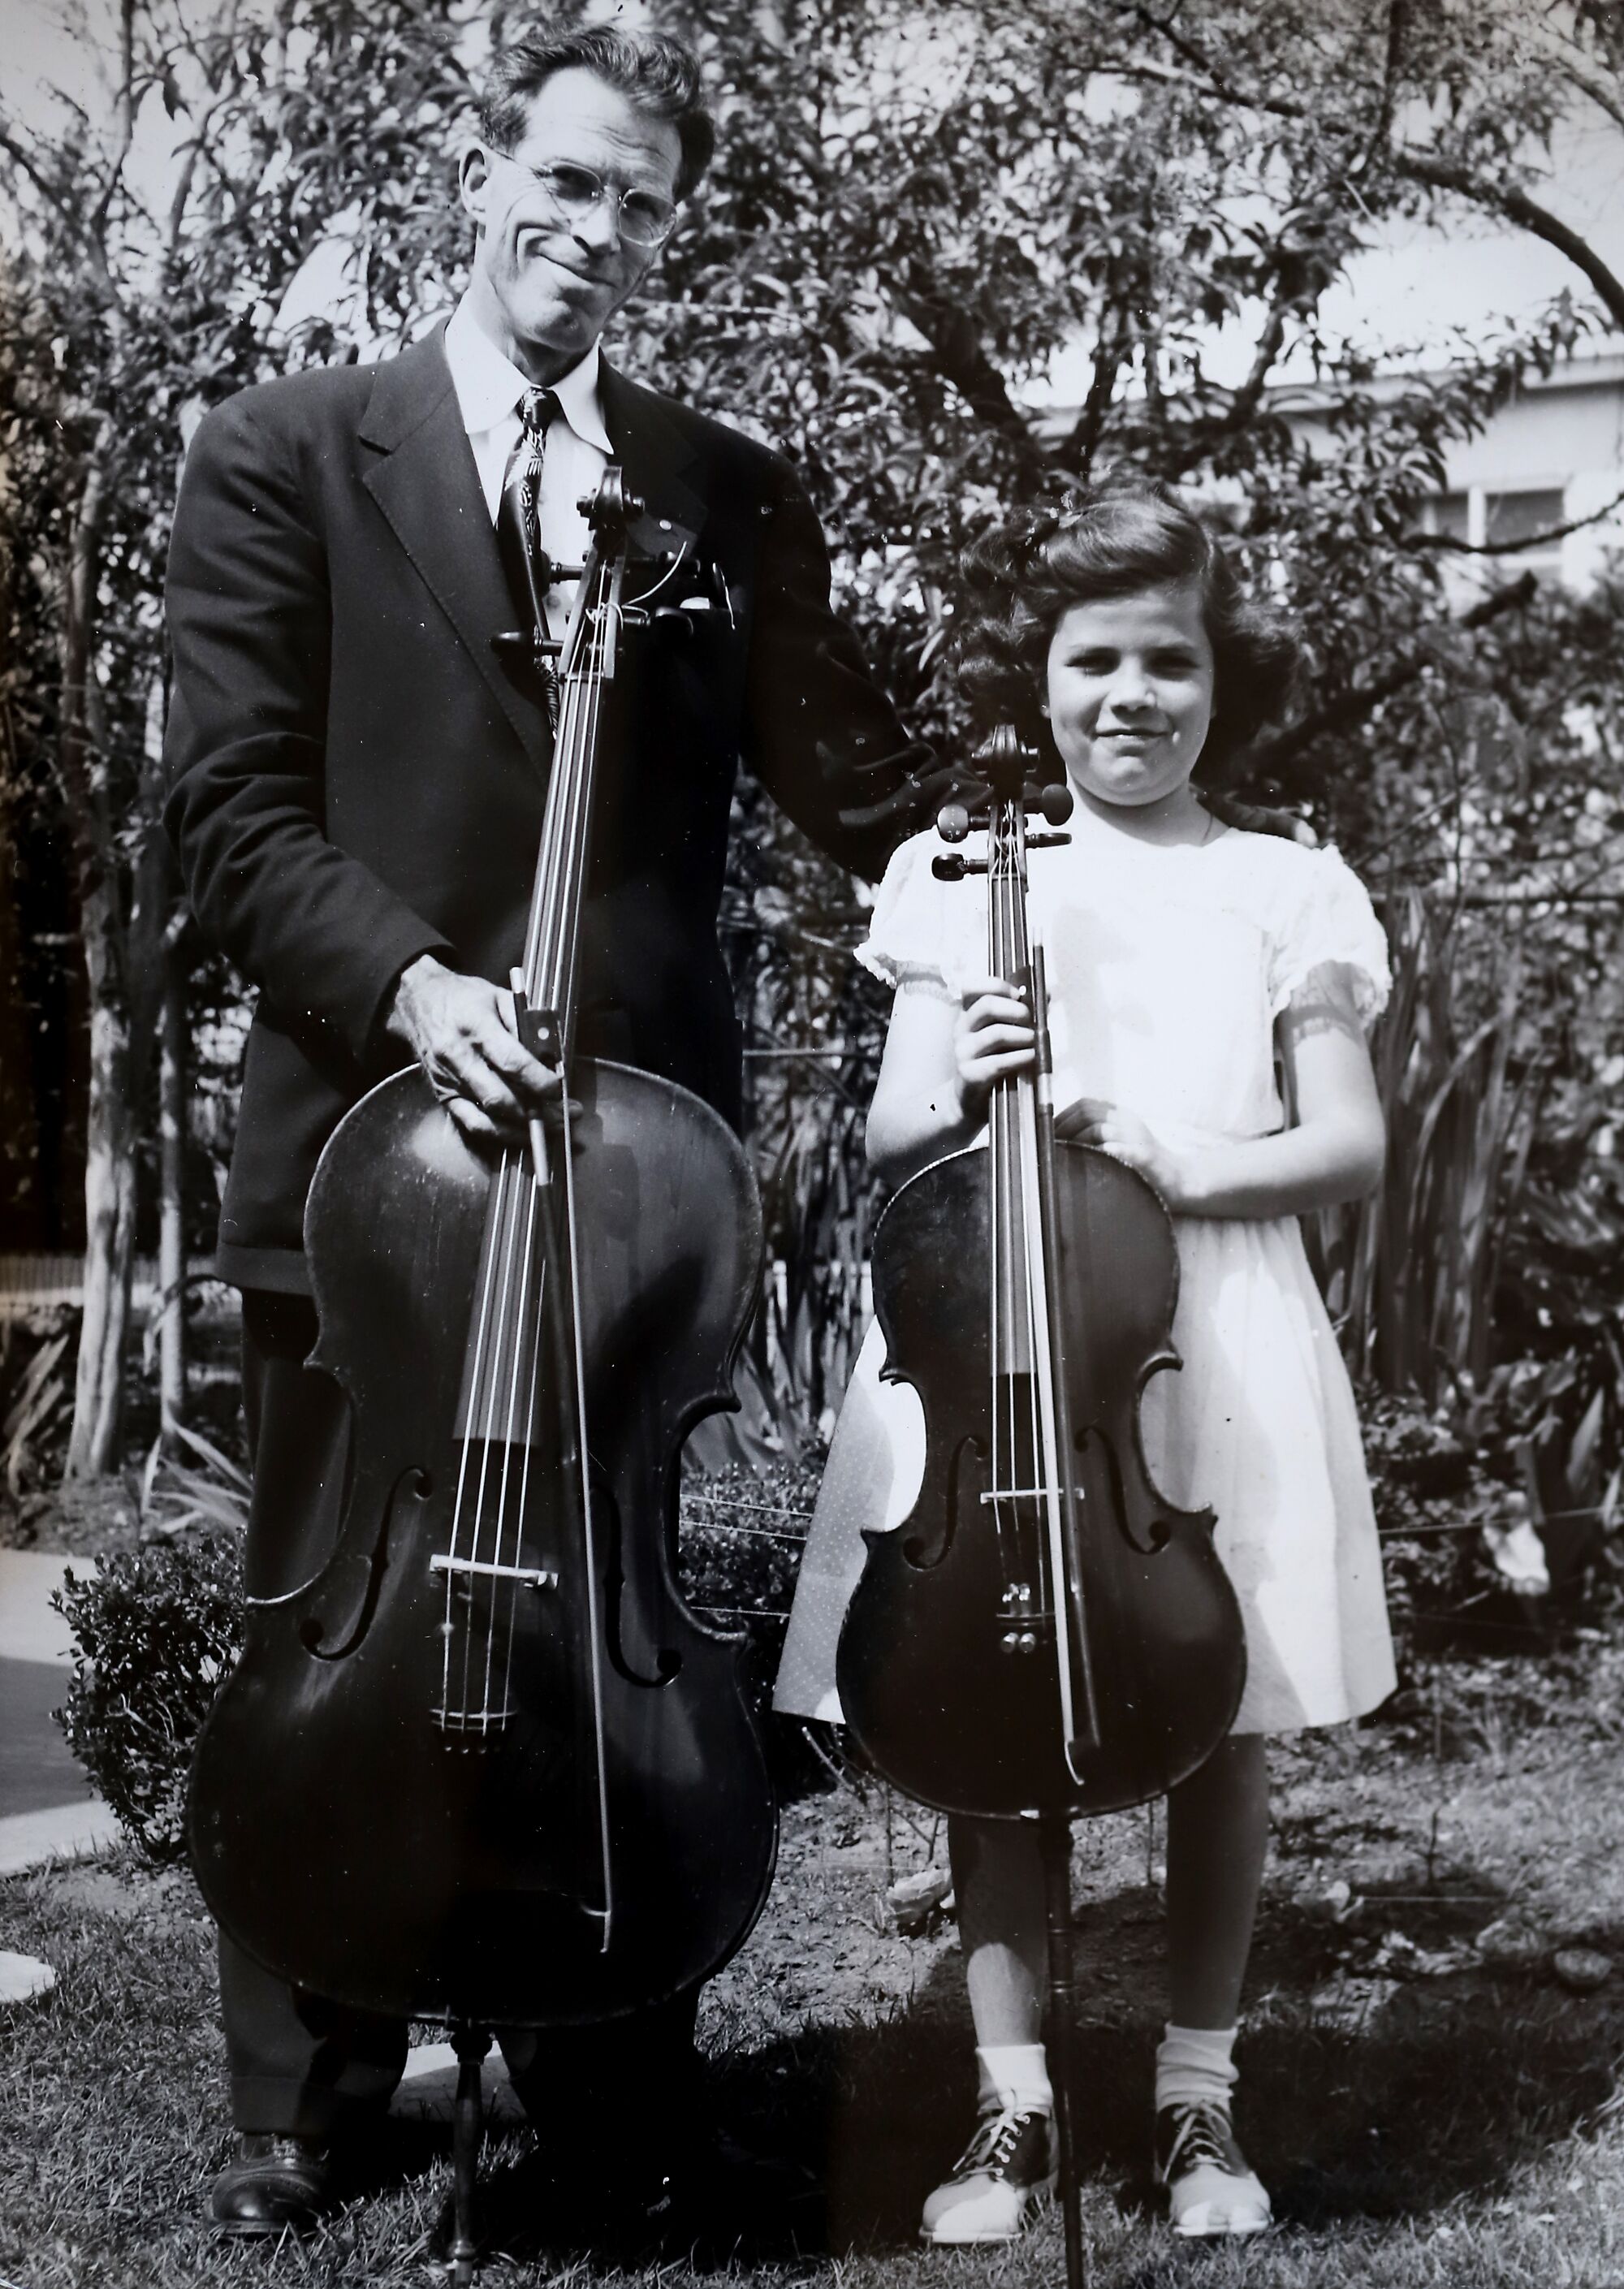 Christine Walevska with her father, Hermann. She is holding a rare Bernardel cello that was stolen in 1976.